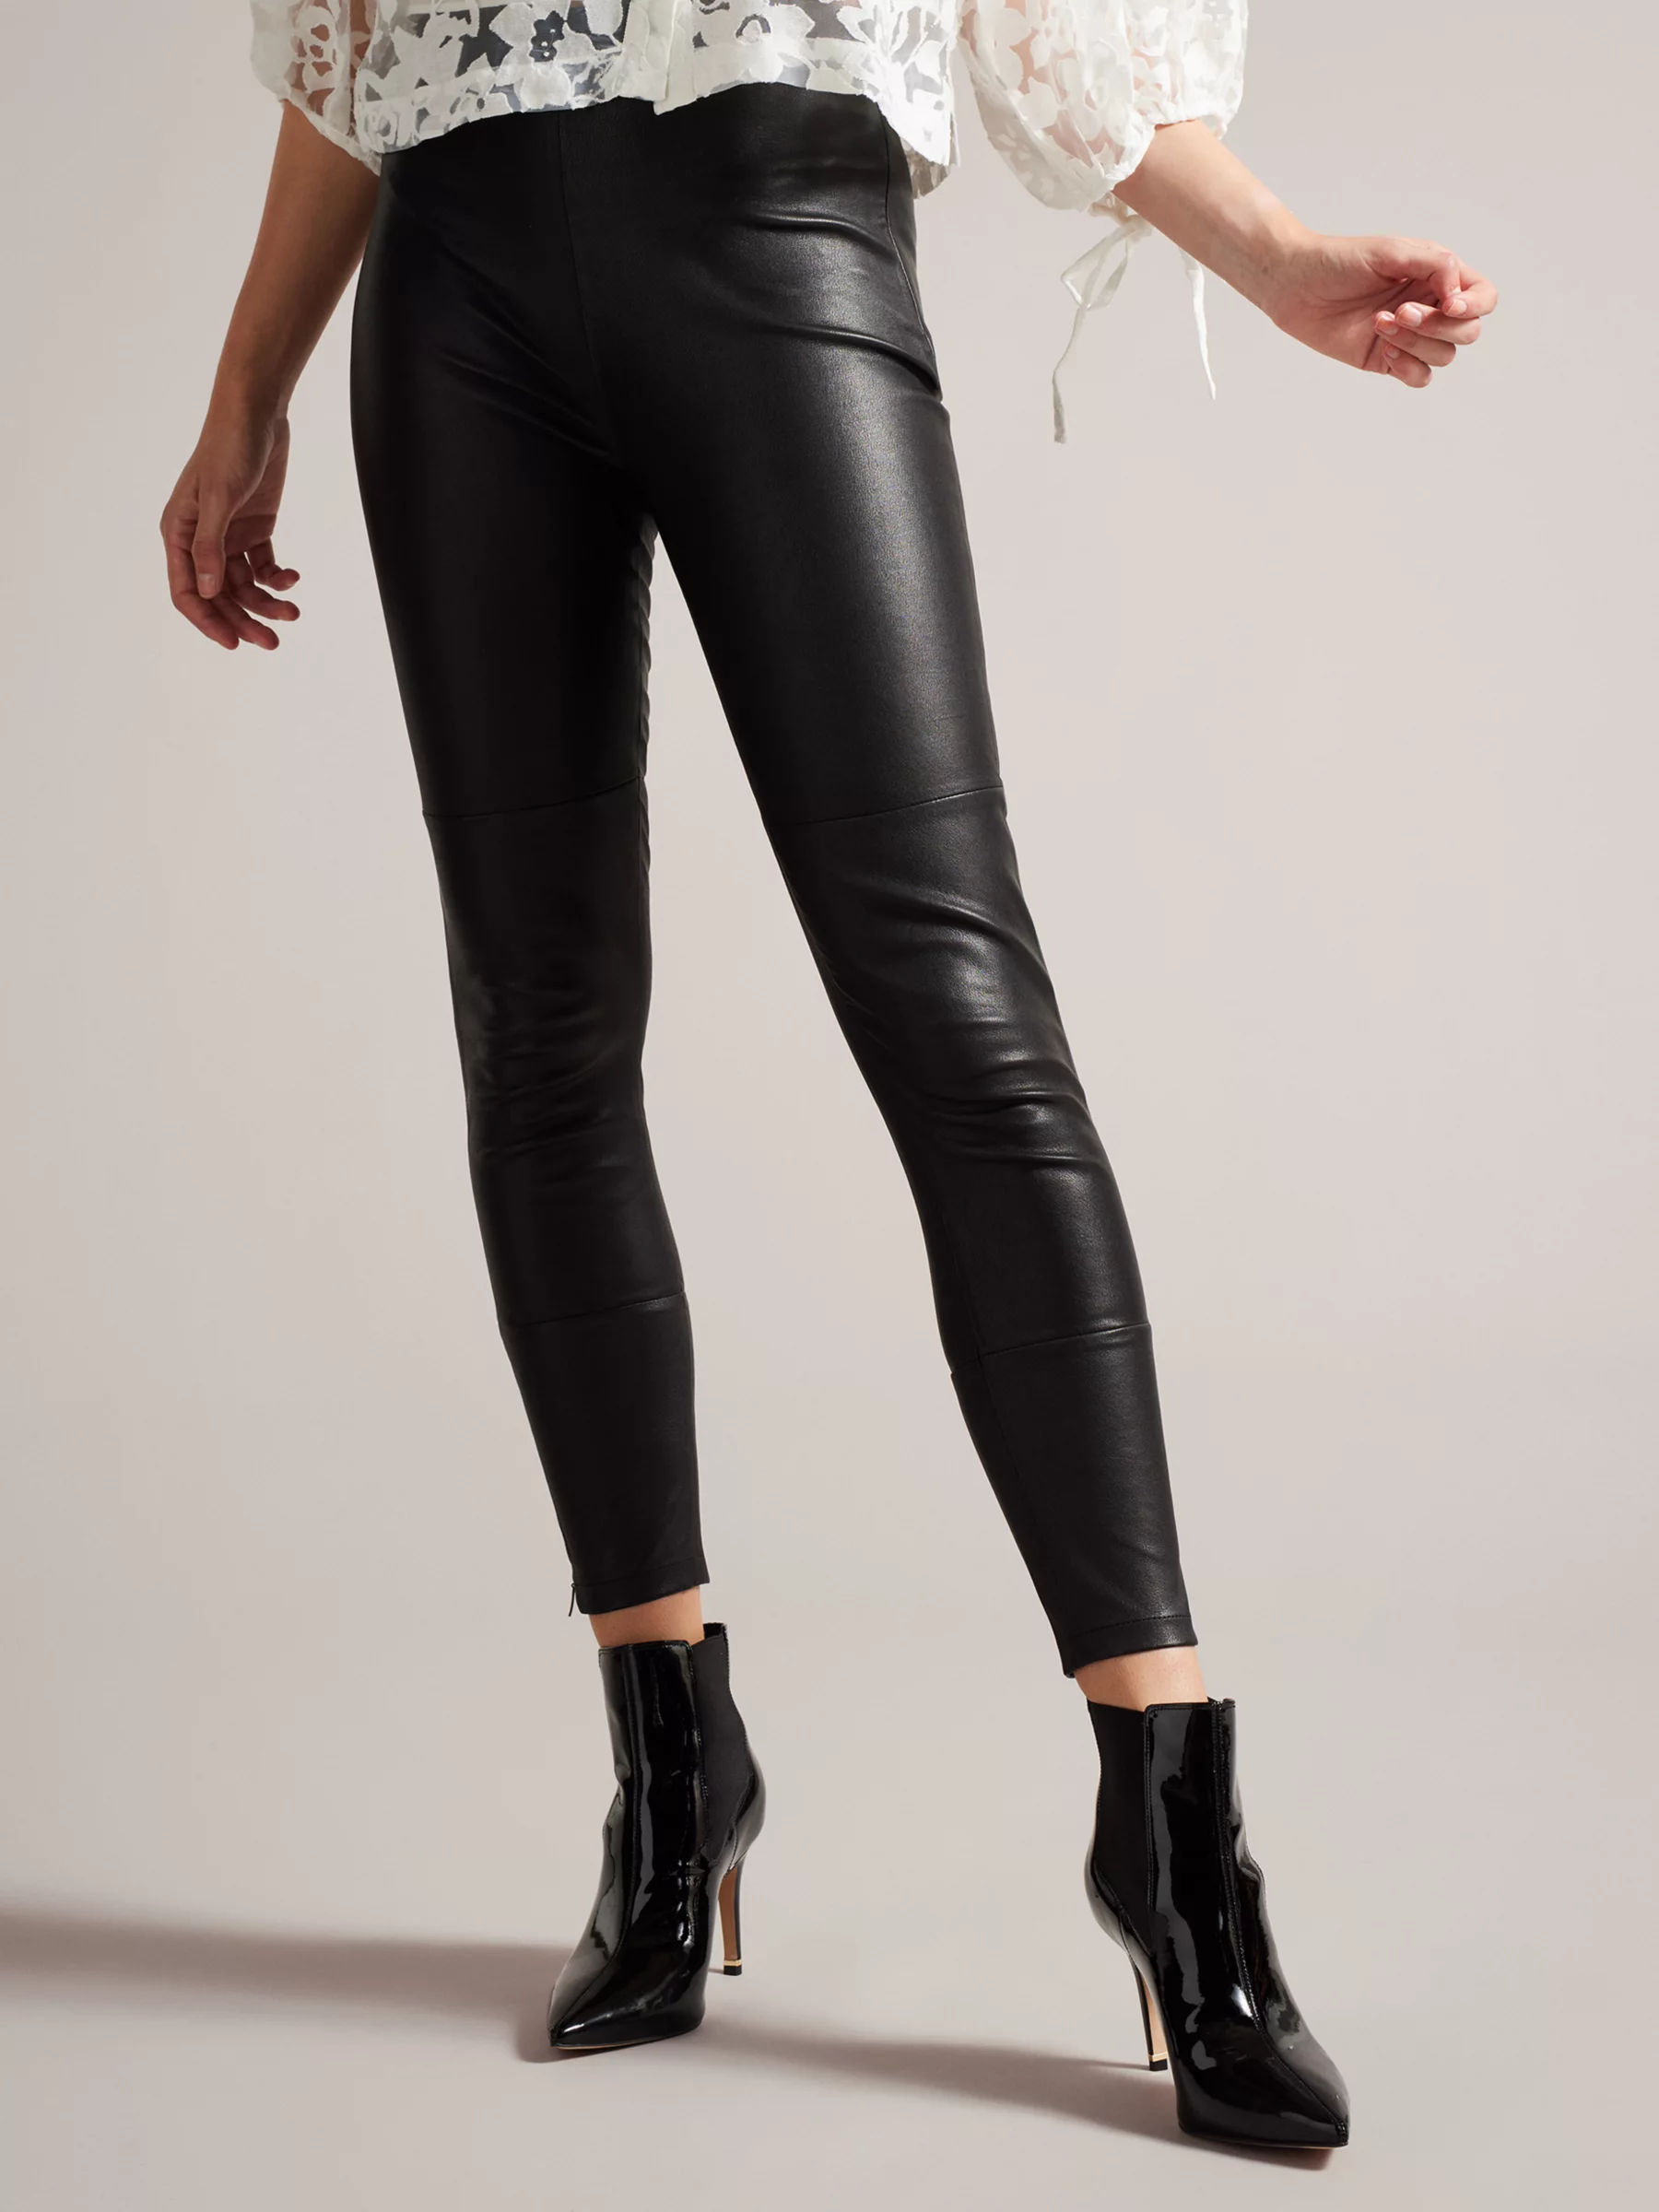 Ted Baker London Just For You Contrast Leather Leggings Ladies W28